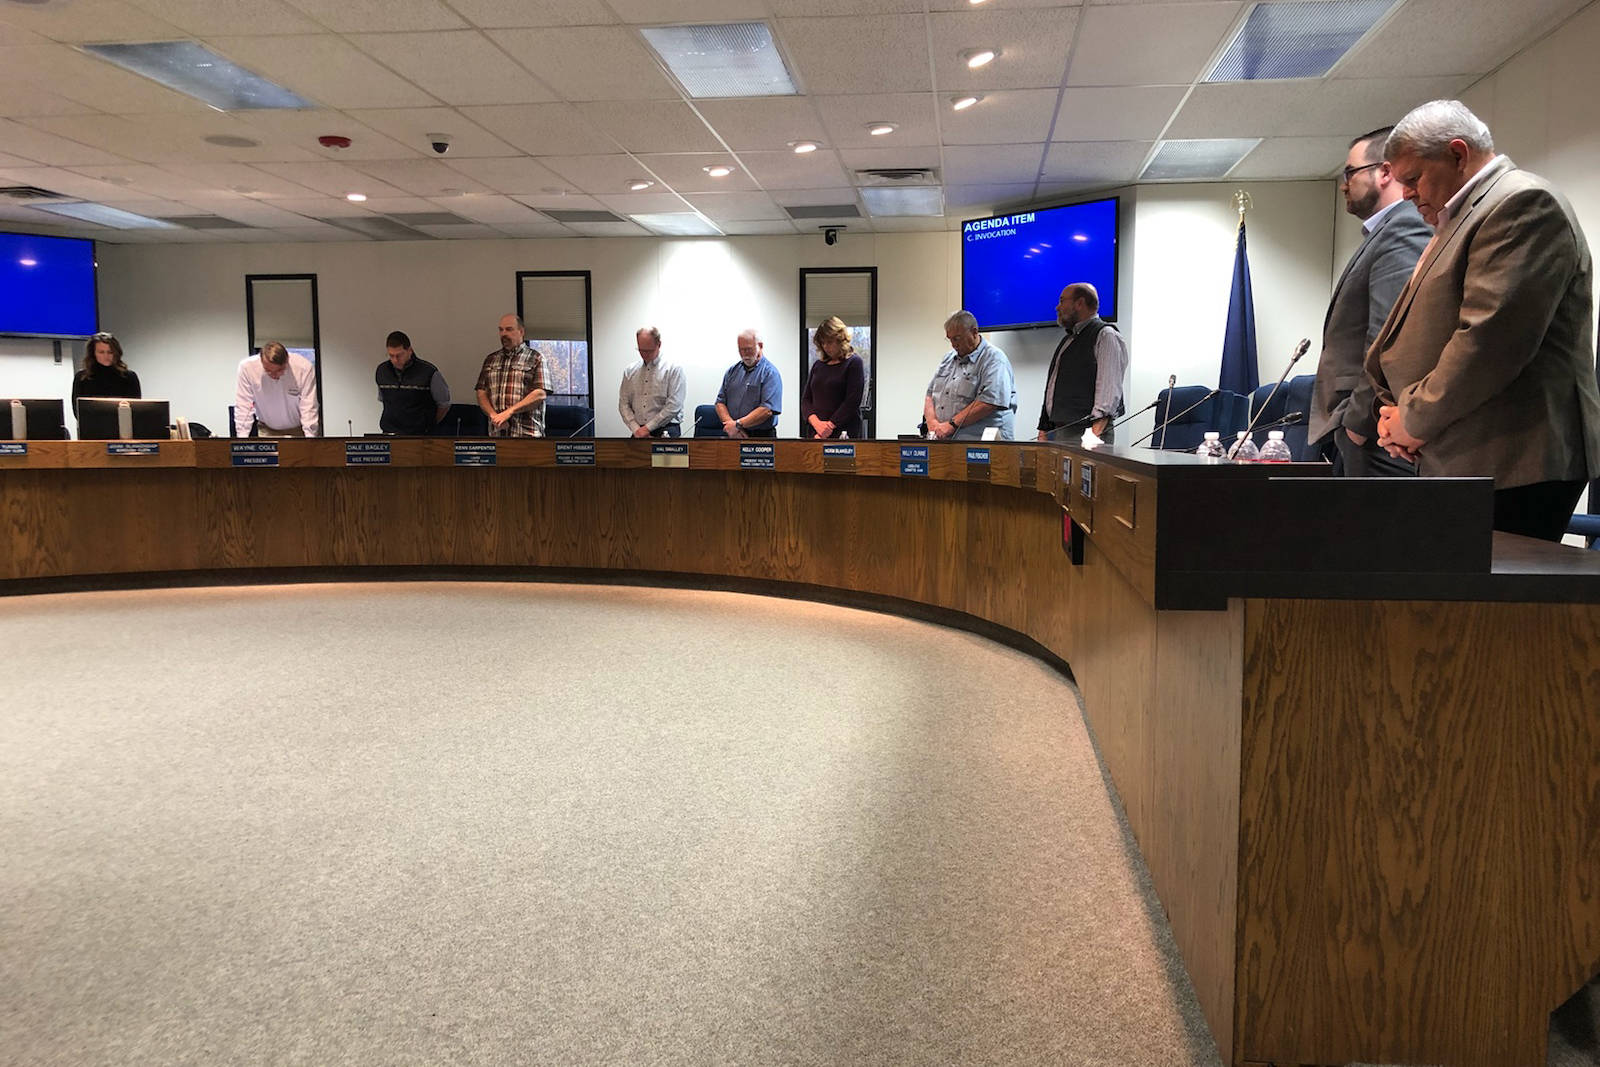 Members of the Kenai Peninsula Borough Assembly hold a religious invocation during the Tuesday, Oct. 9, 2018, assembly meeting in Soldotna, Alaska. The invocation was held only hours after the Alaska Superior Court ruled the ritual violated the Alaska Constitution. (Photo by Victoria Petersen/Peninsula Clarion)